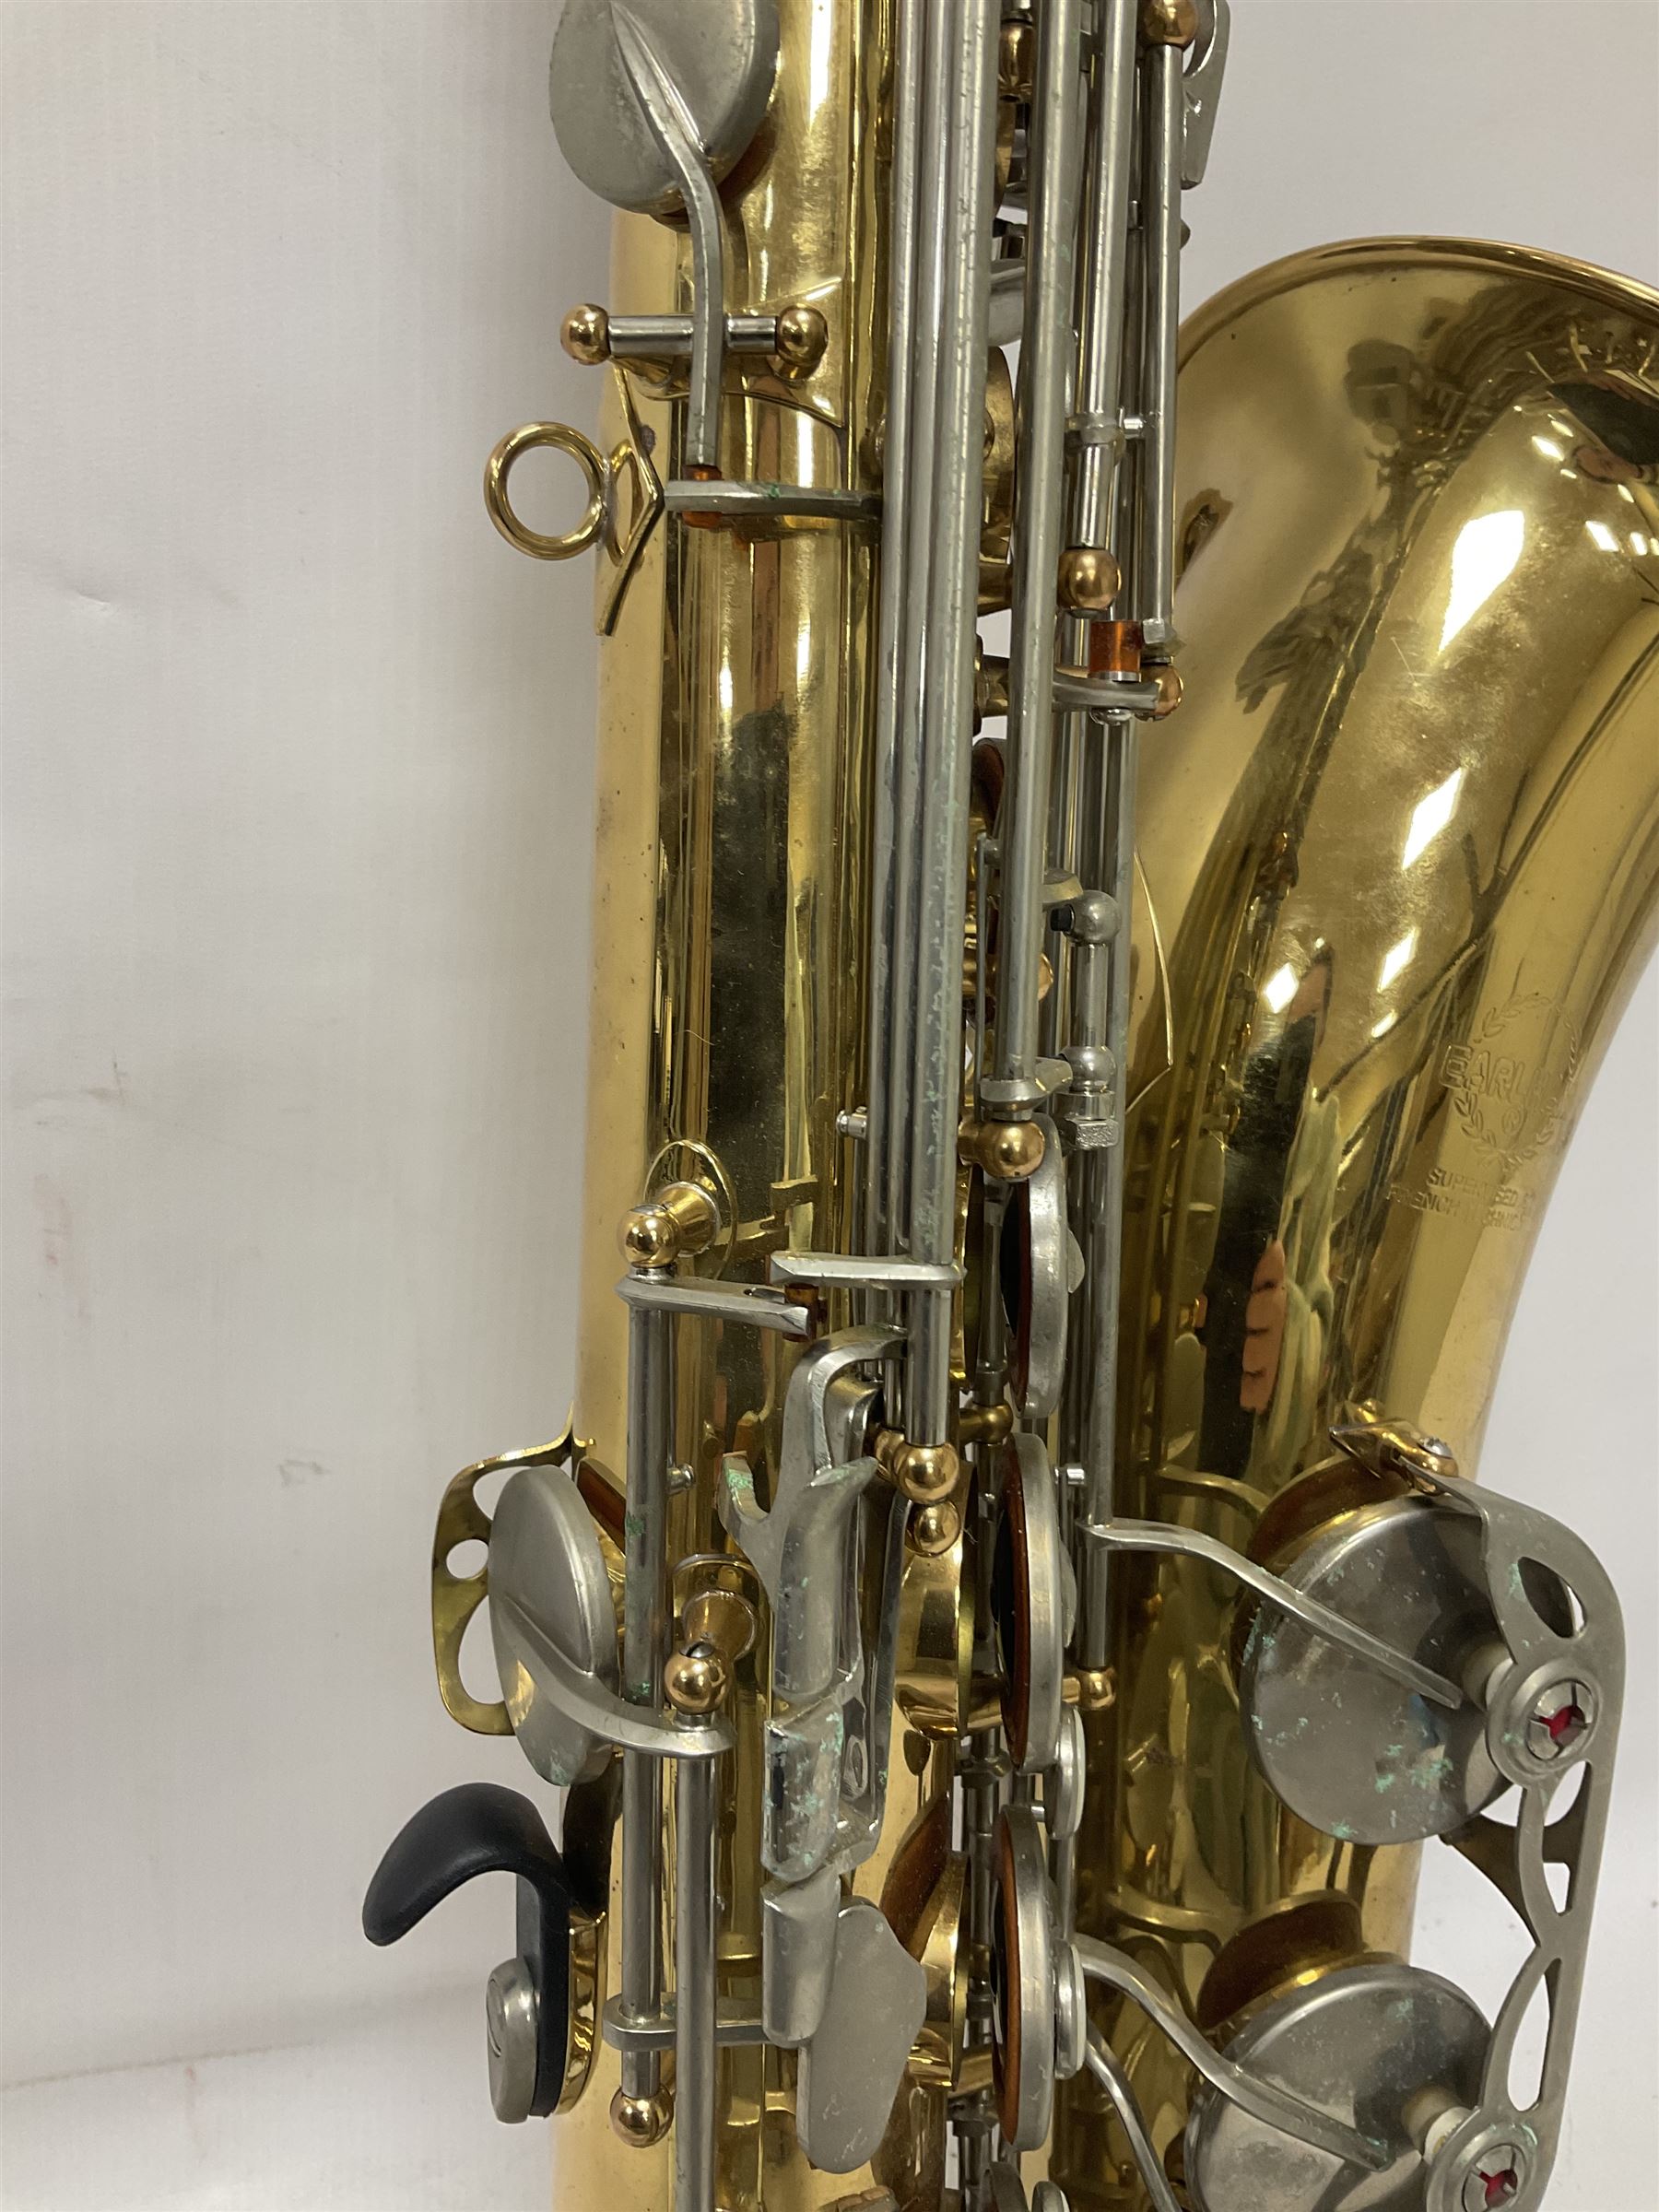 Earlham Tenor saxophone with mouthpiece in a fitted velvet lined hard case - Image 11 of 26